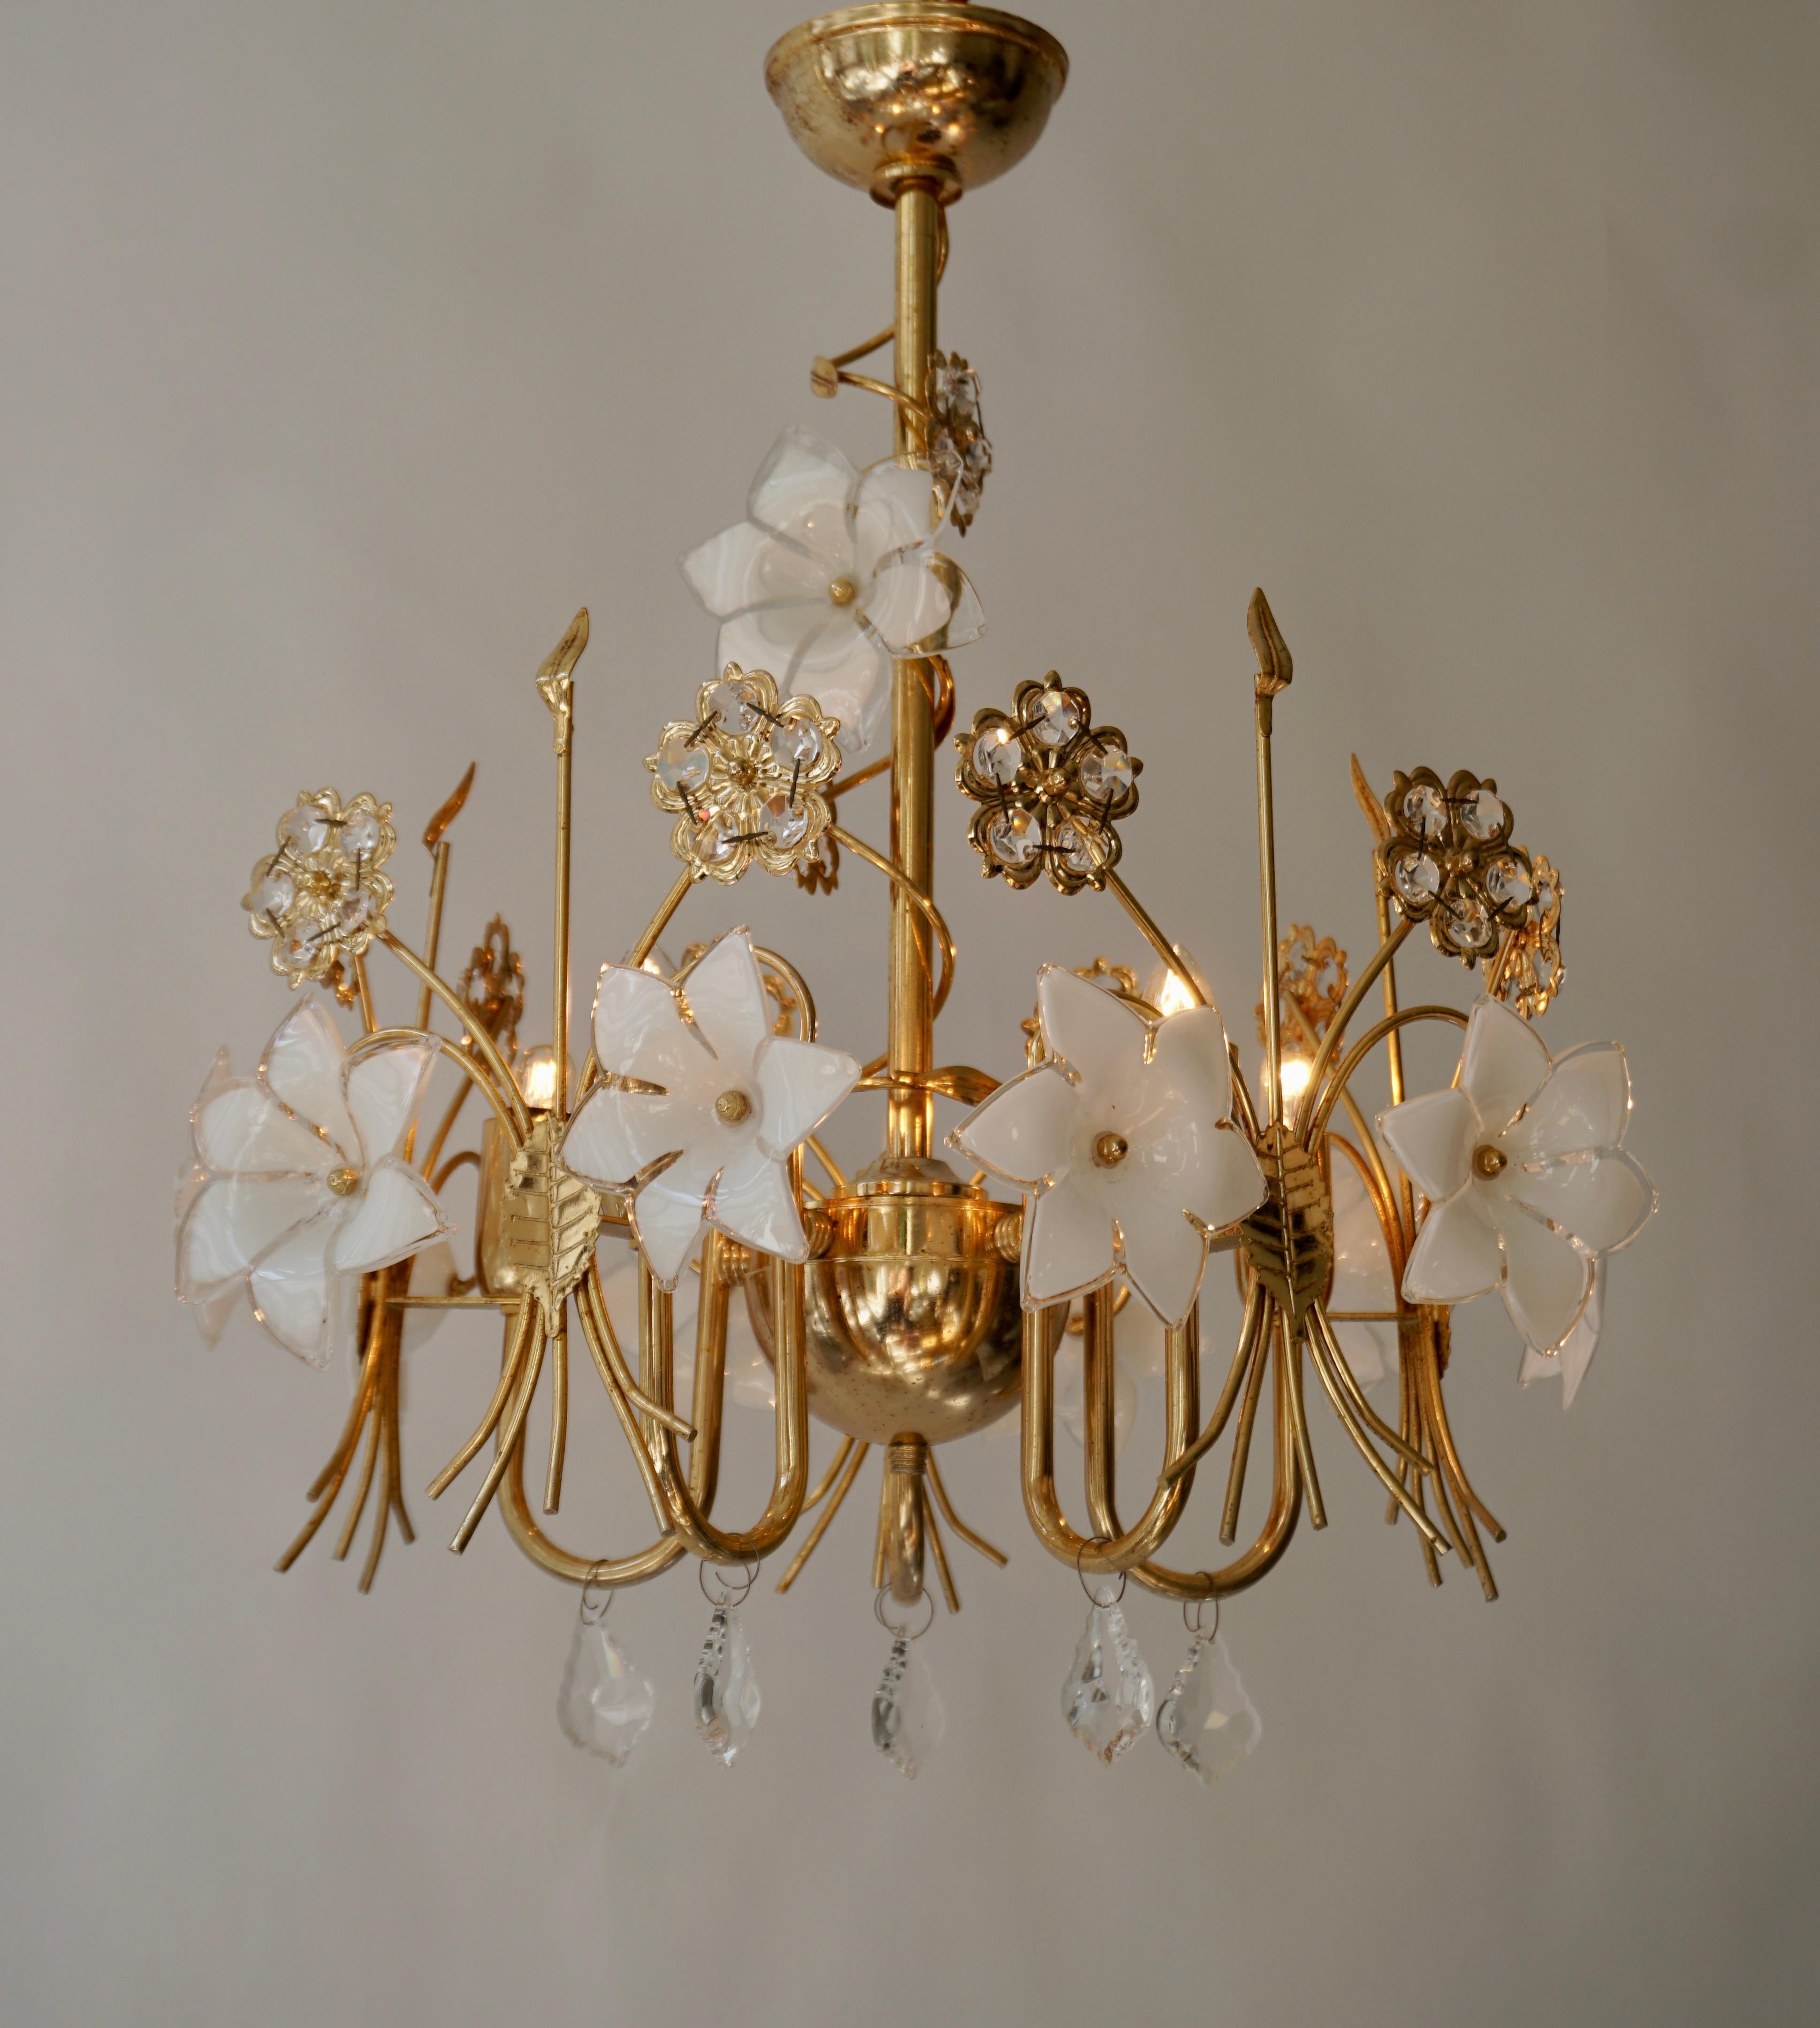 A Murano glass chandelier featuring  white glass flowers radiating from a brass frame with five standard sockets.

Charming ceiling light, composed of a golden base adorned with white Murano glass and crystal flowers. Every flower is unique in it's